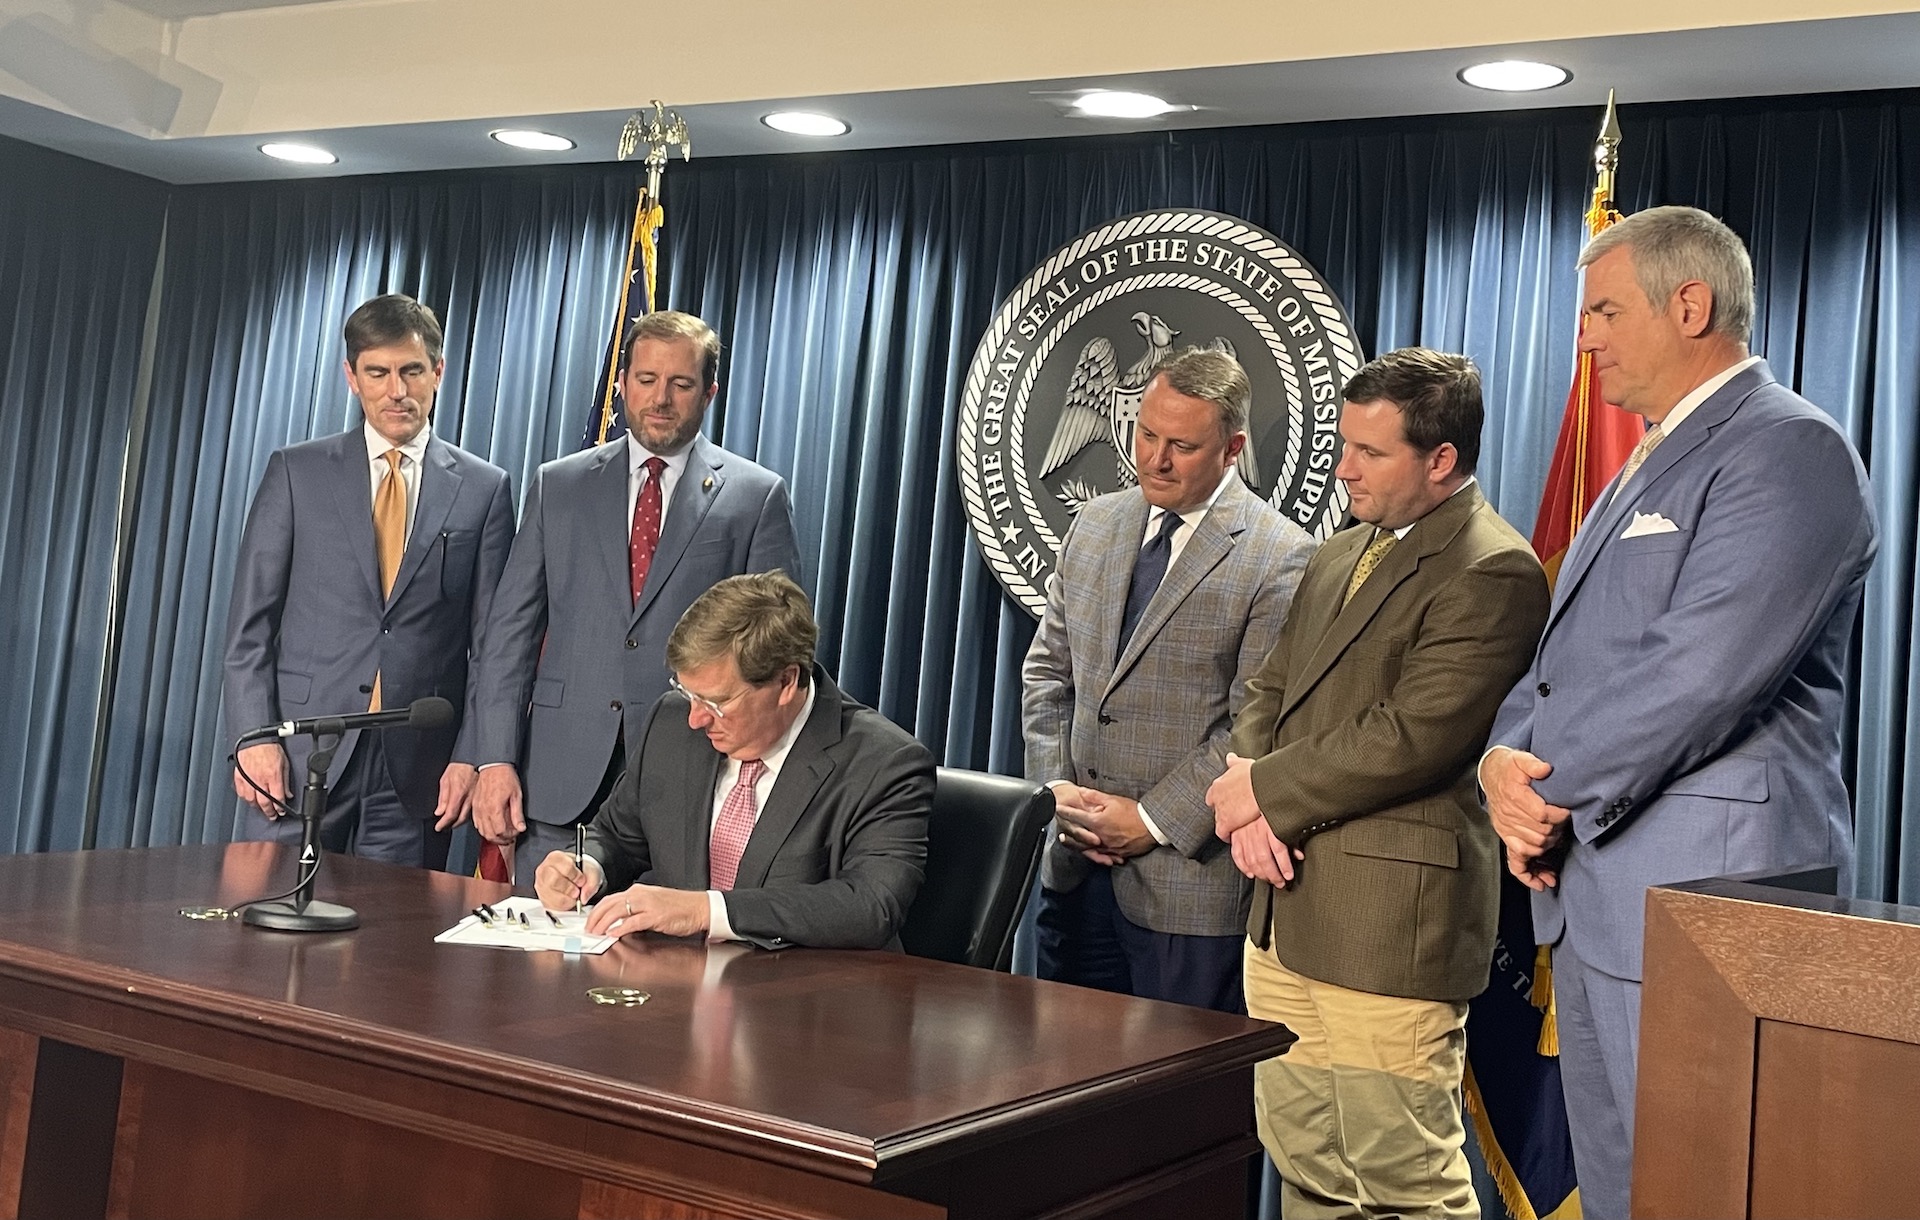 Mississippi Moves Forward with Tax Reform